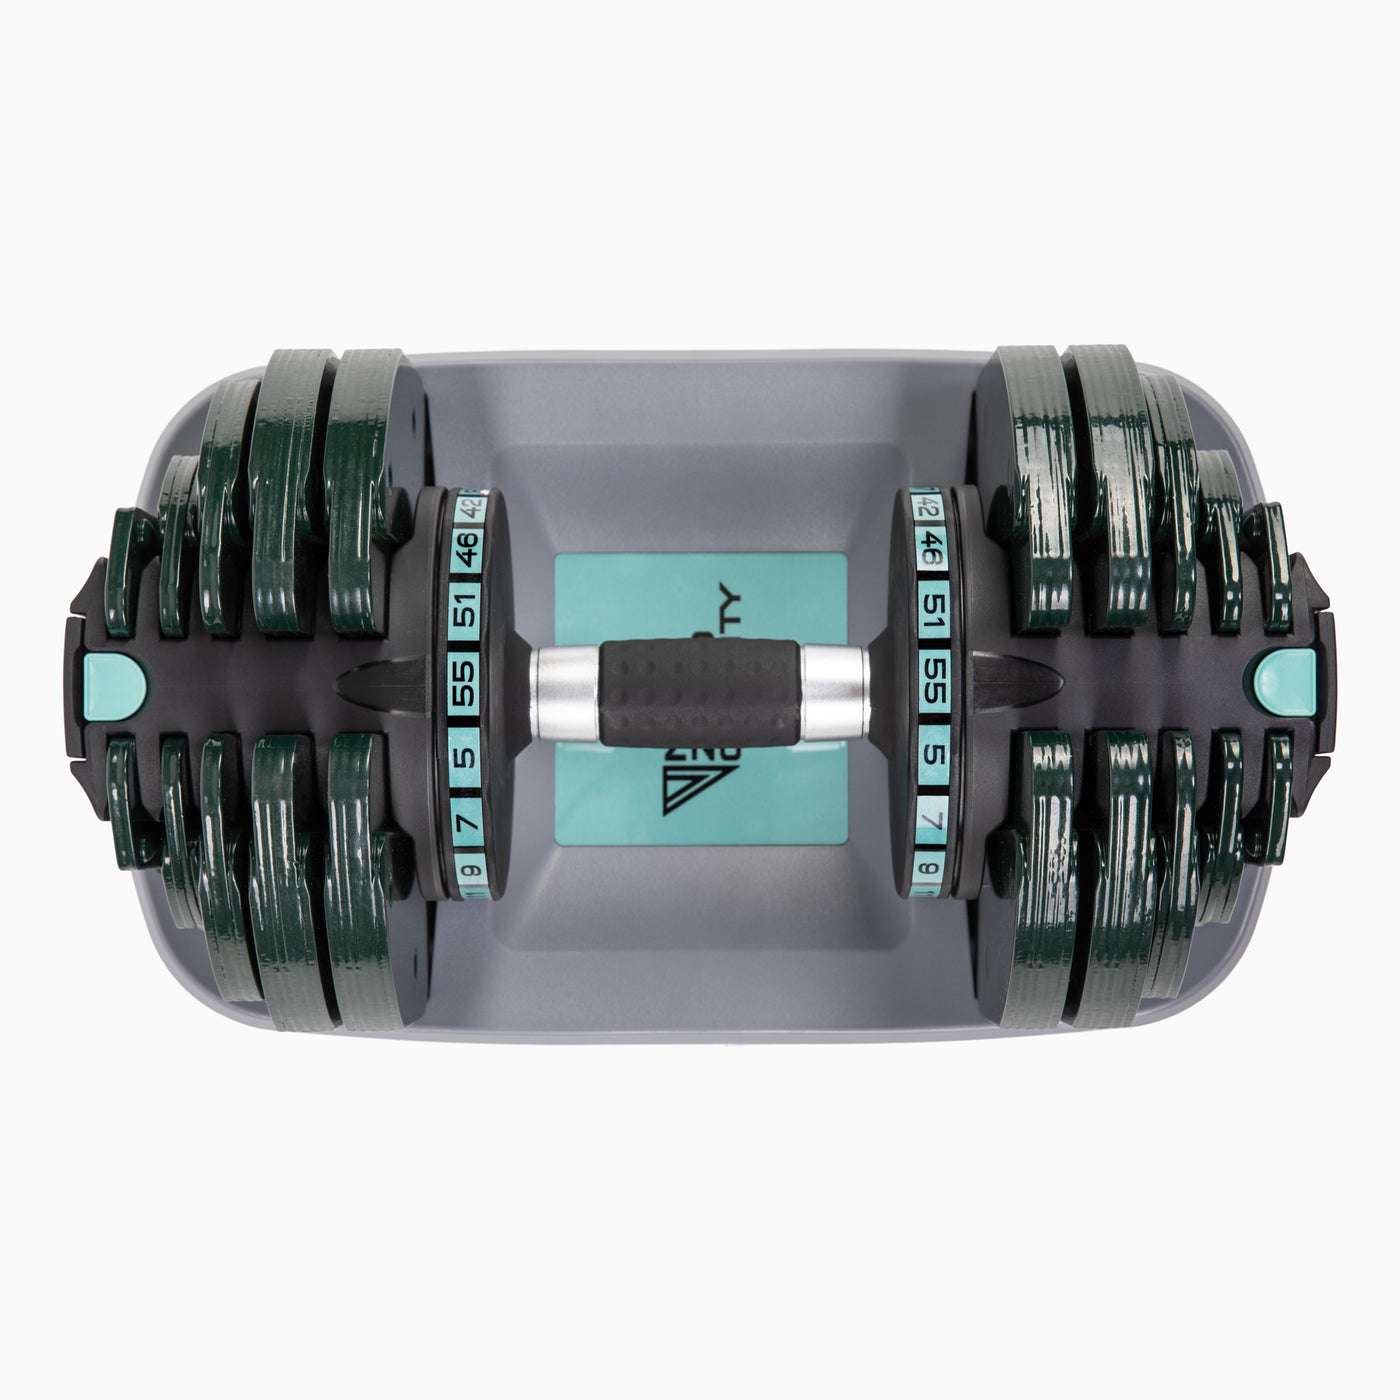 PowerDyne Adjustable Dumbbell Weight - Lift Up To 55lbs with At-Home Strength Training Equipment in aspen green color scheme 